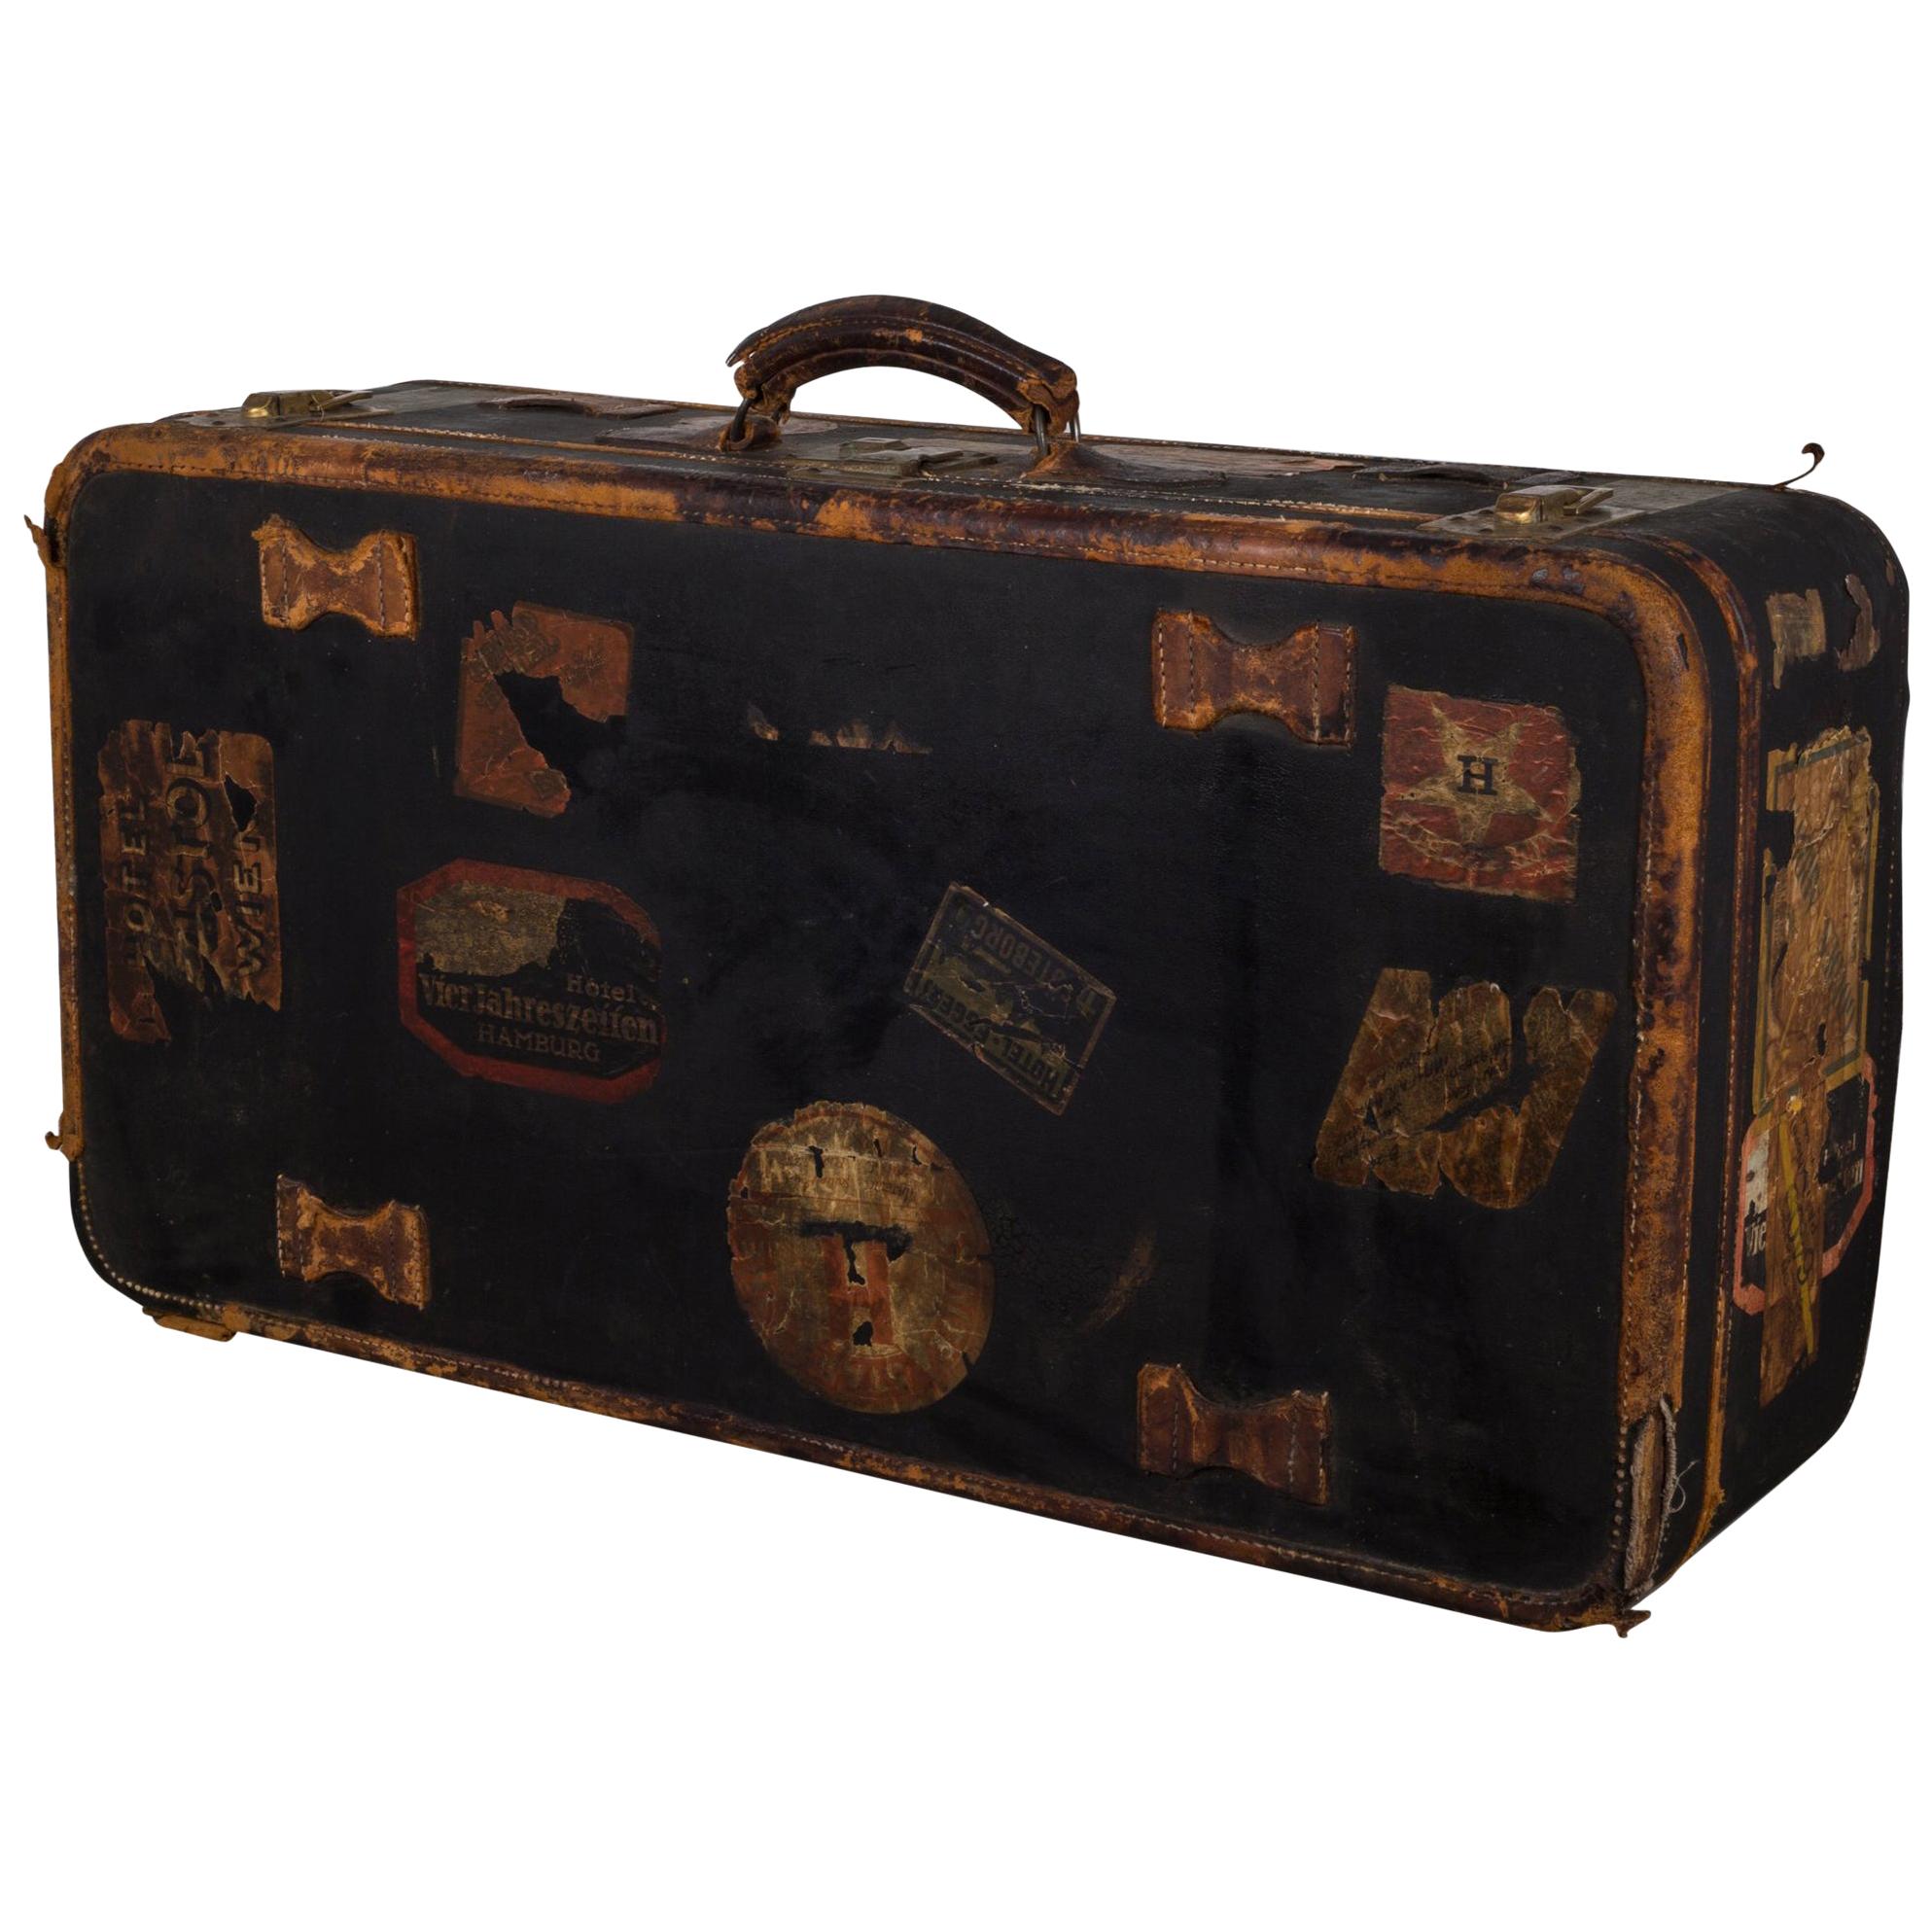 Antique French Suitcase with Original Travel Stickers, circa 1900-1930